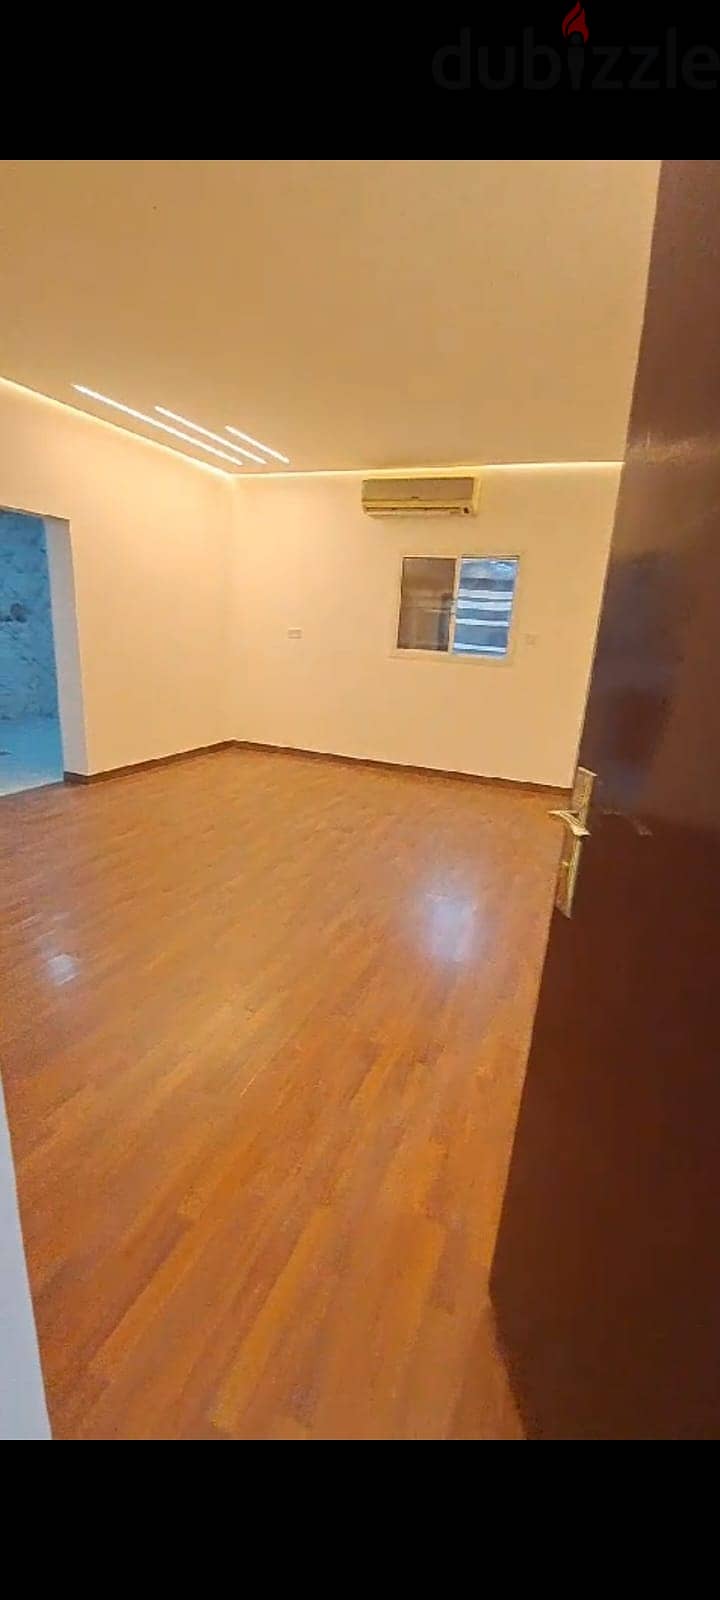 For rent flat (Ground floor apartment) in compound in Al Nasr 3bhk 9